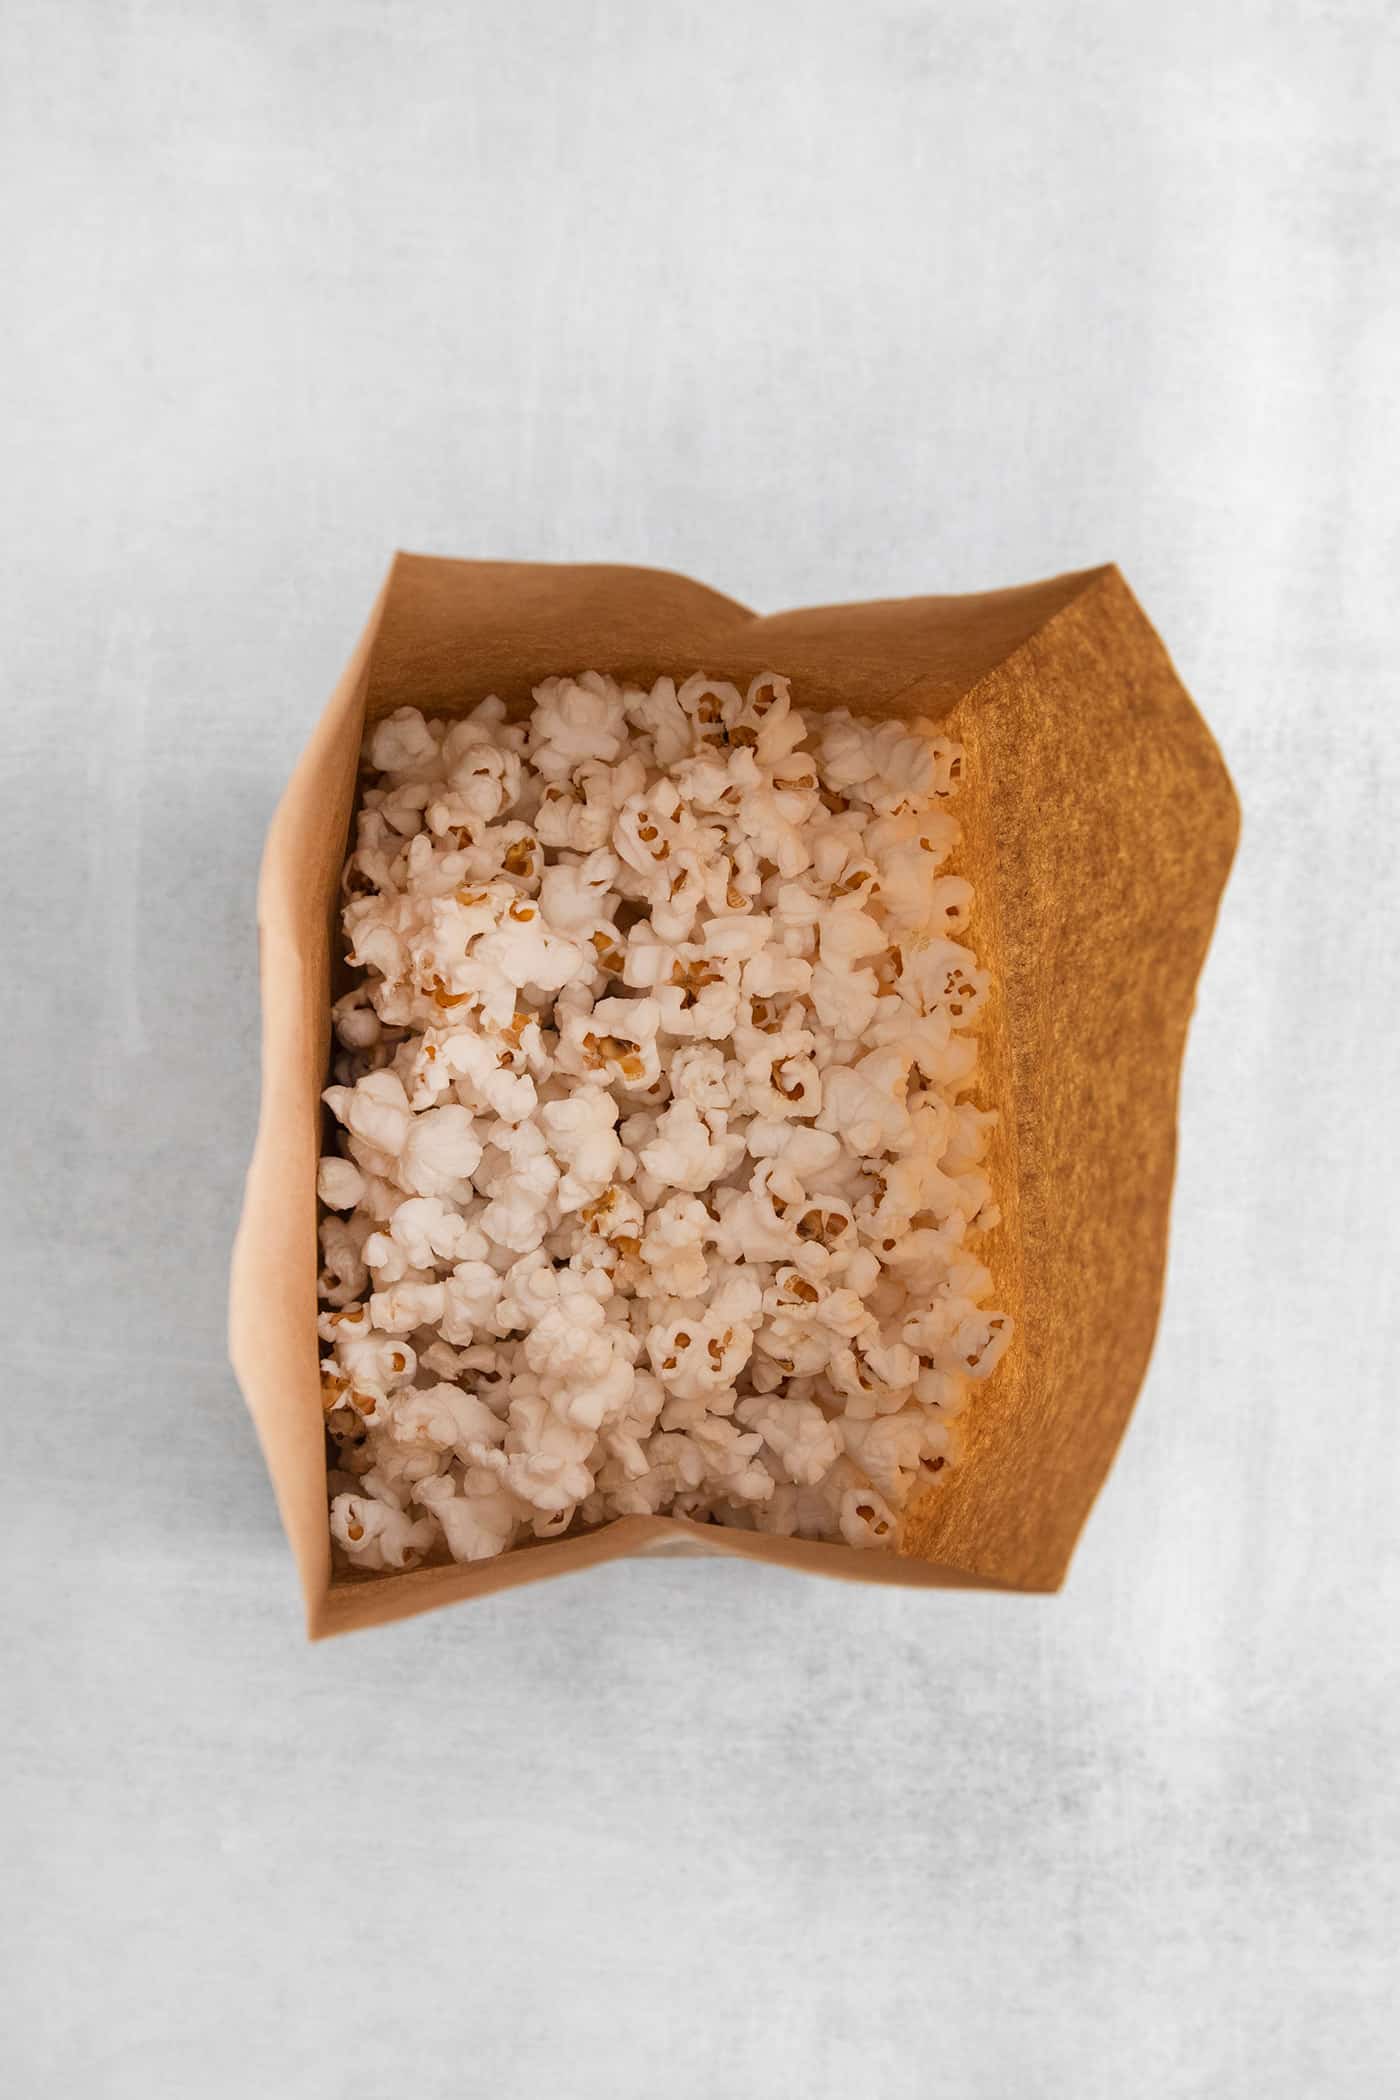 Popped popcorn in a brown paper bag